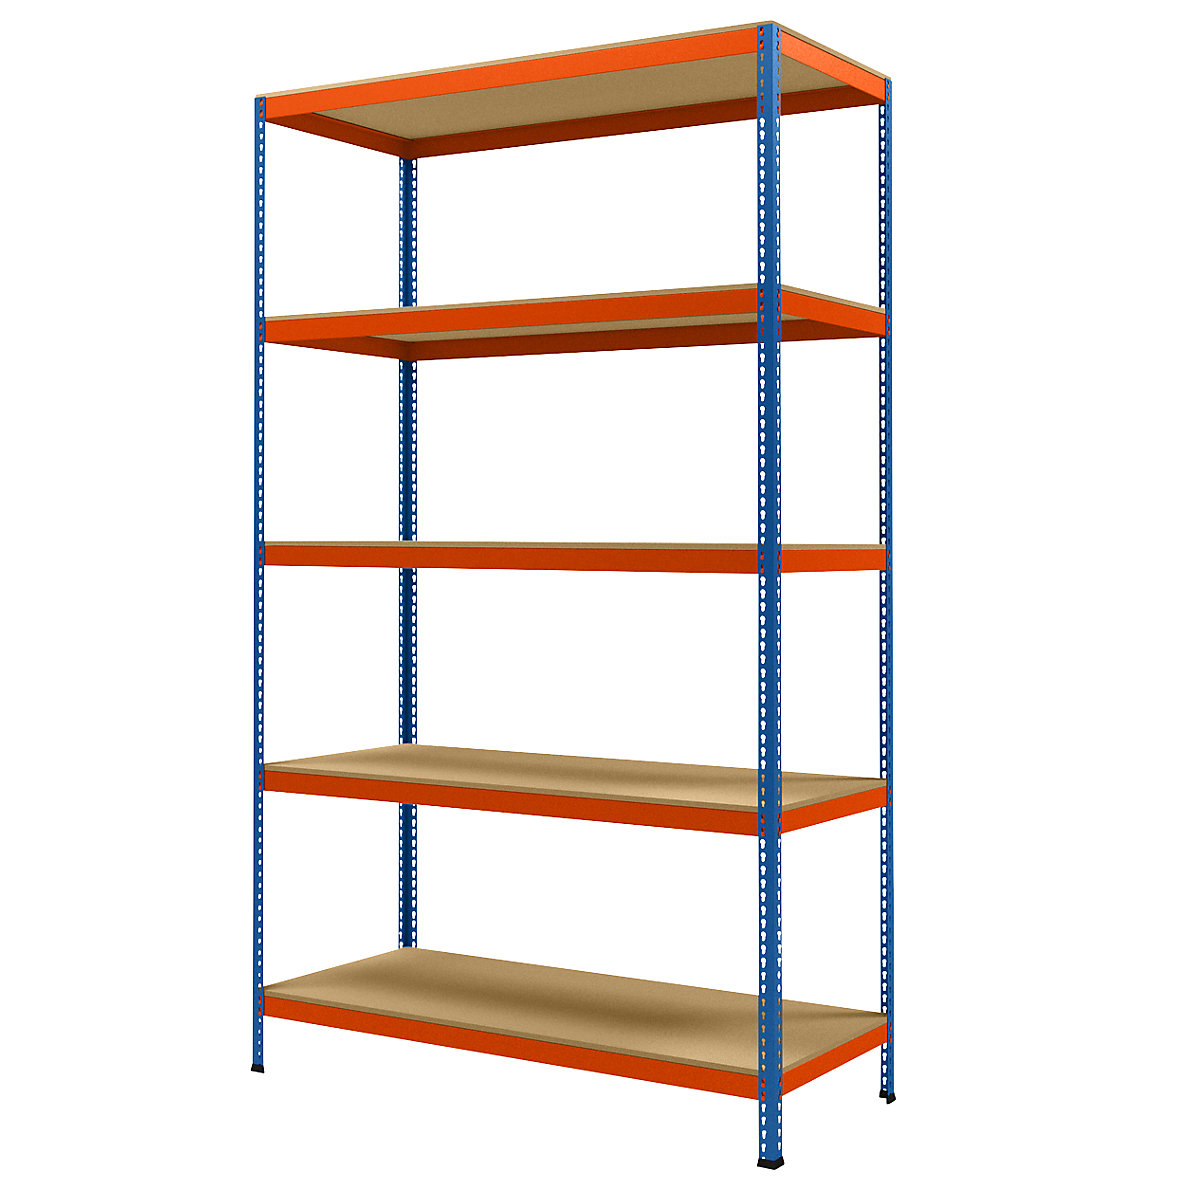 Wide span heavy duty shelving, height 3048 mm, overall depth 773 mm, width 1841 mm